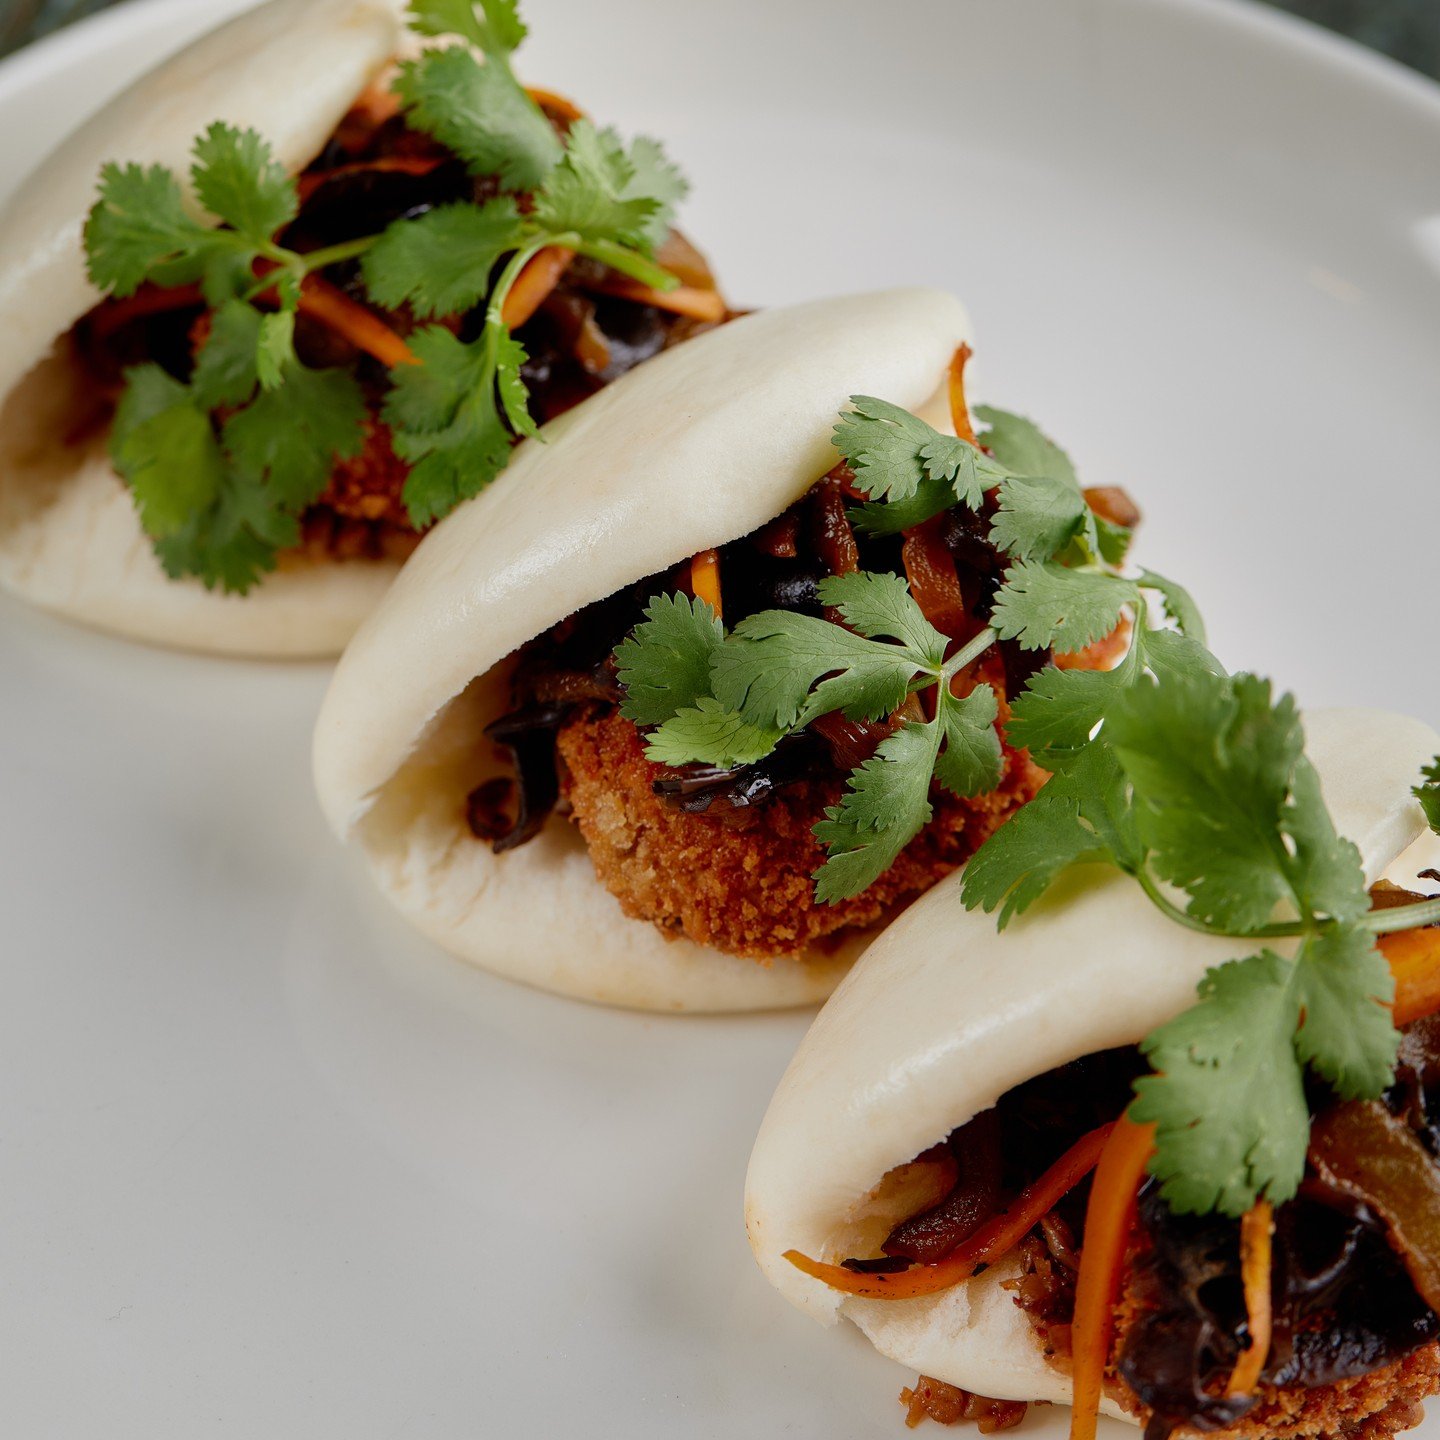 A trio of mushroom gua bao. Perfect for a light lunch or sharing snack. Plus it's vegan-friendly!

Guest chef menu item this season, from @elijah_chen_ 

#squareonecoffeeroasters #themulberrygroup